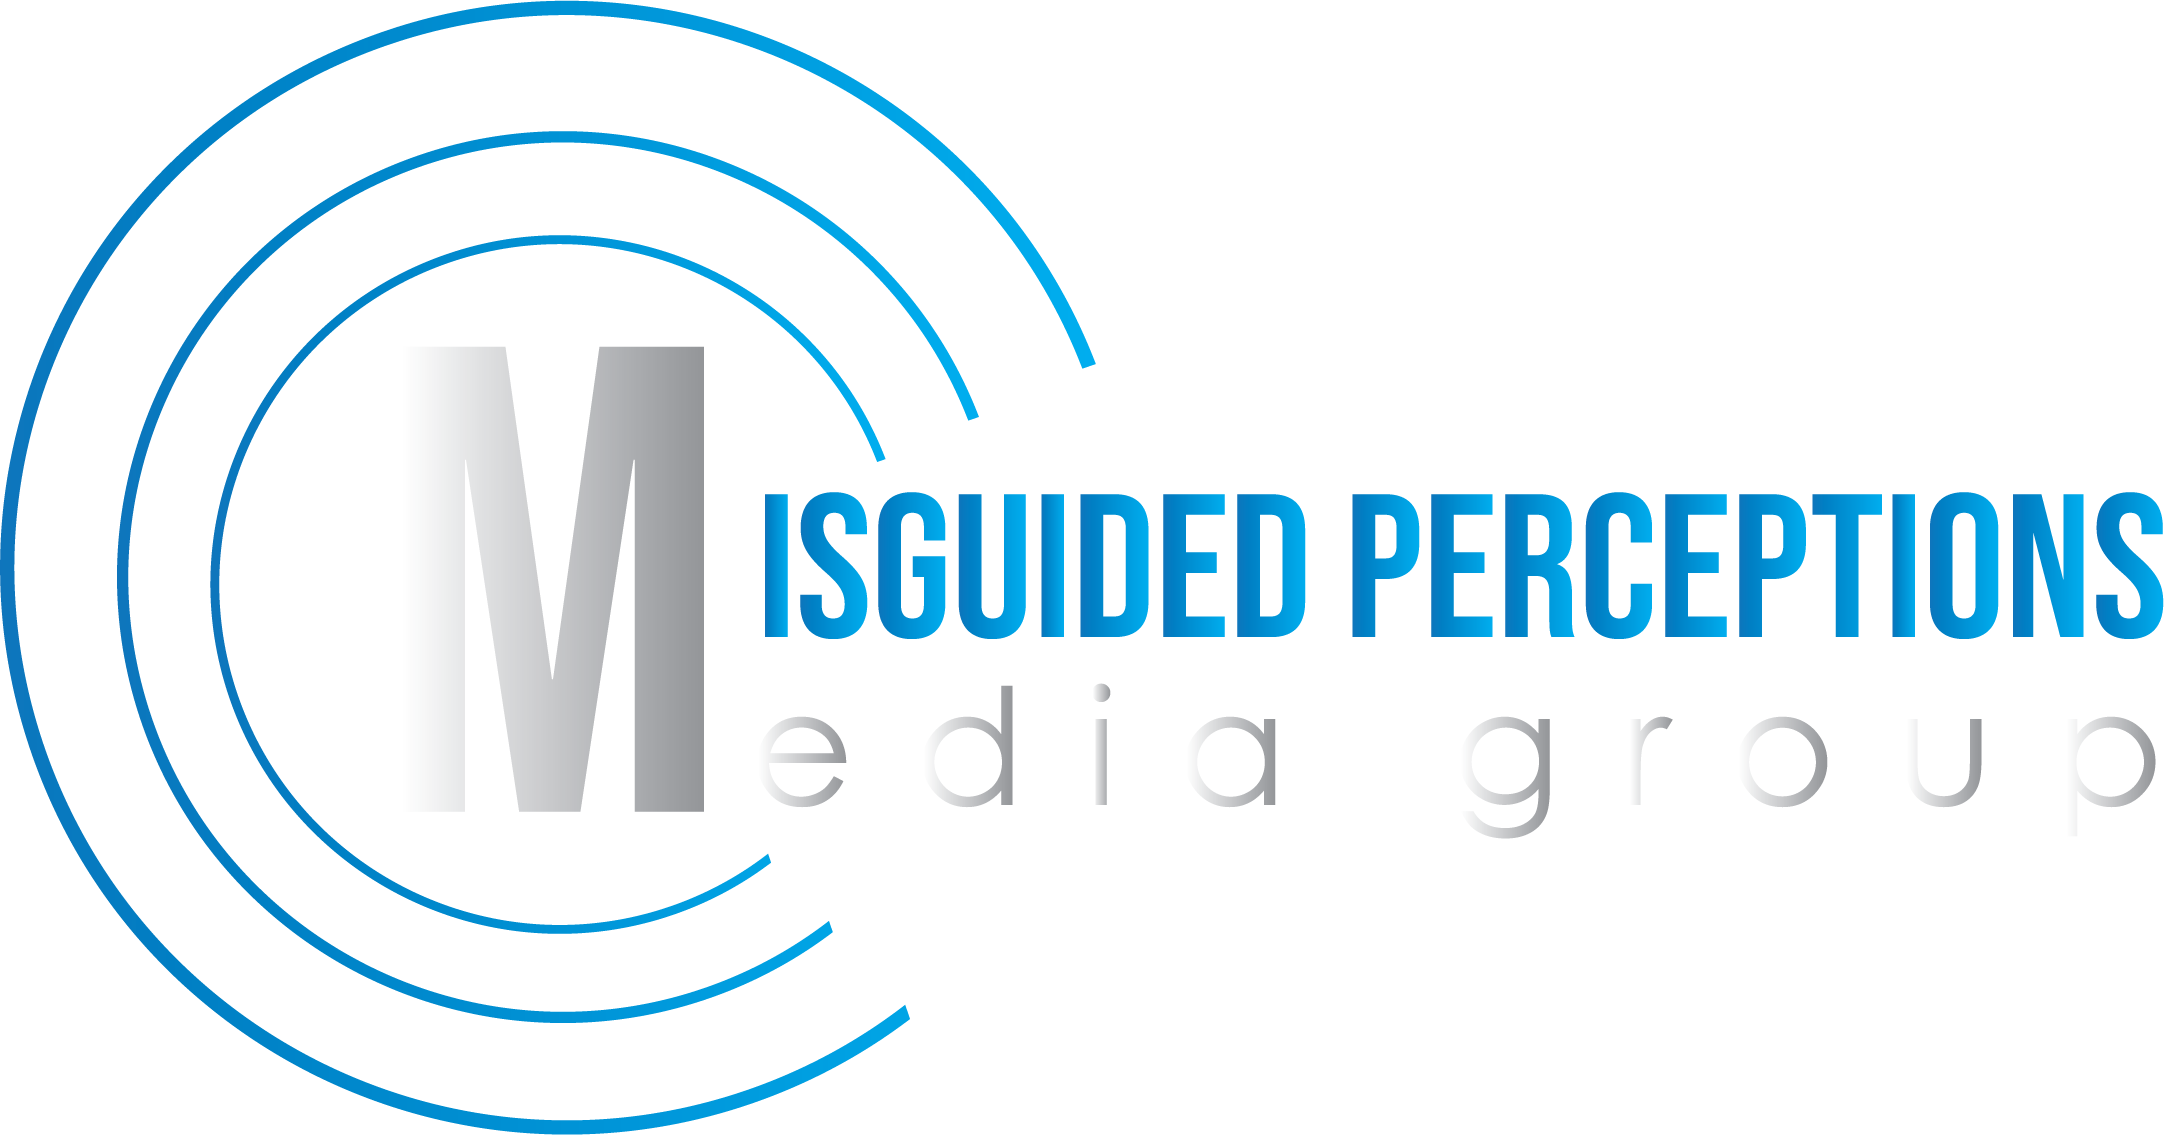 Misguided Perceptions Media Group